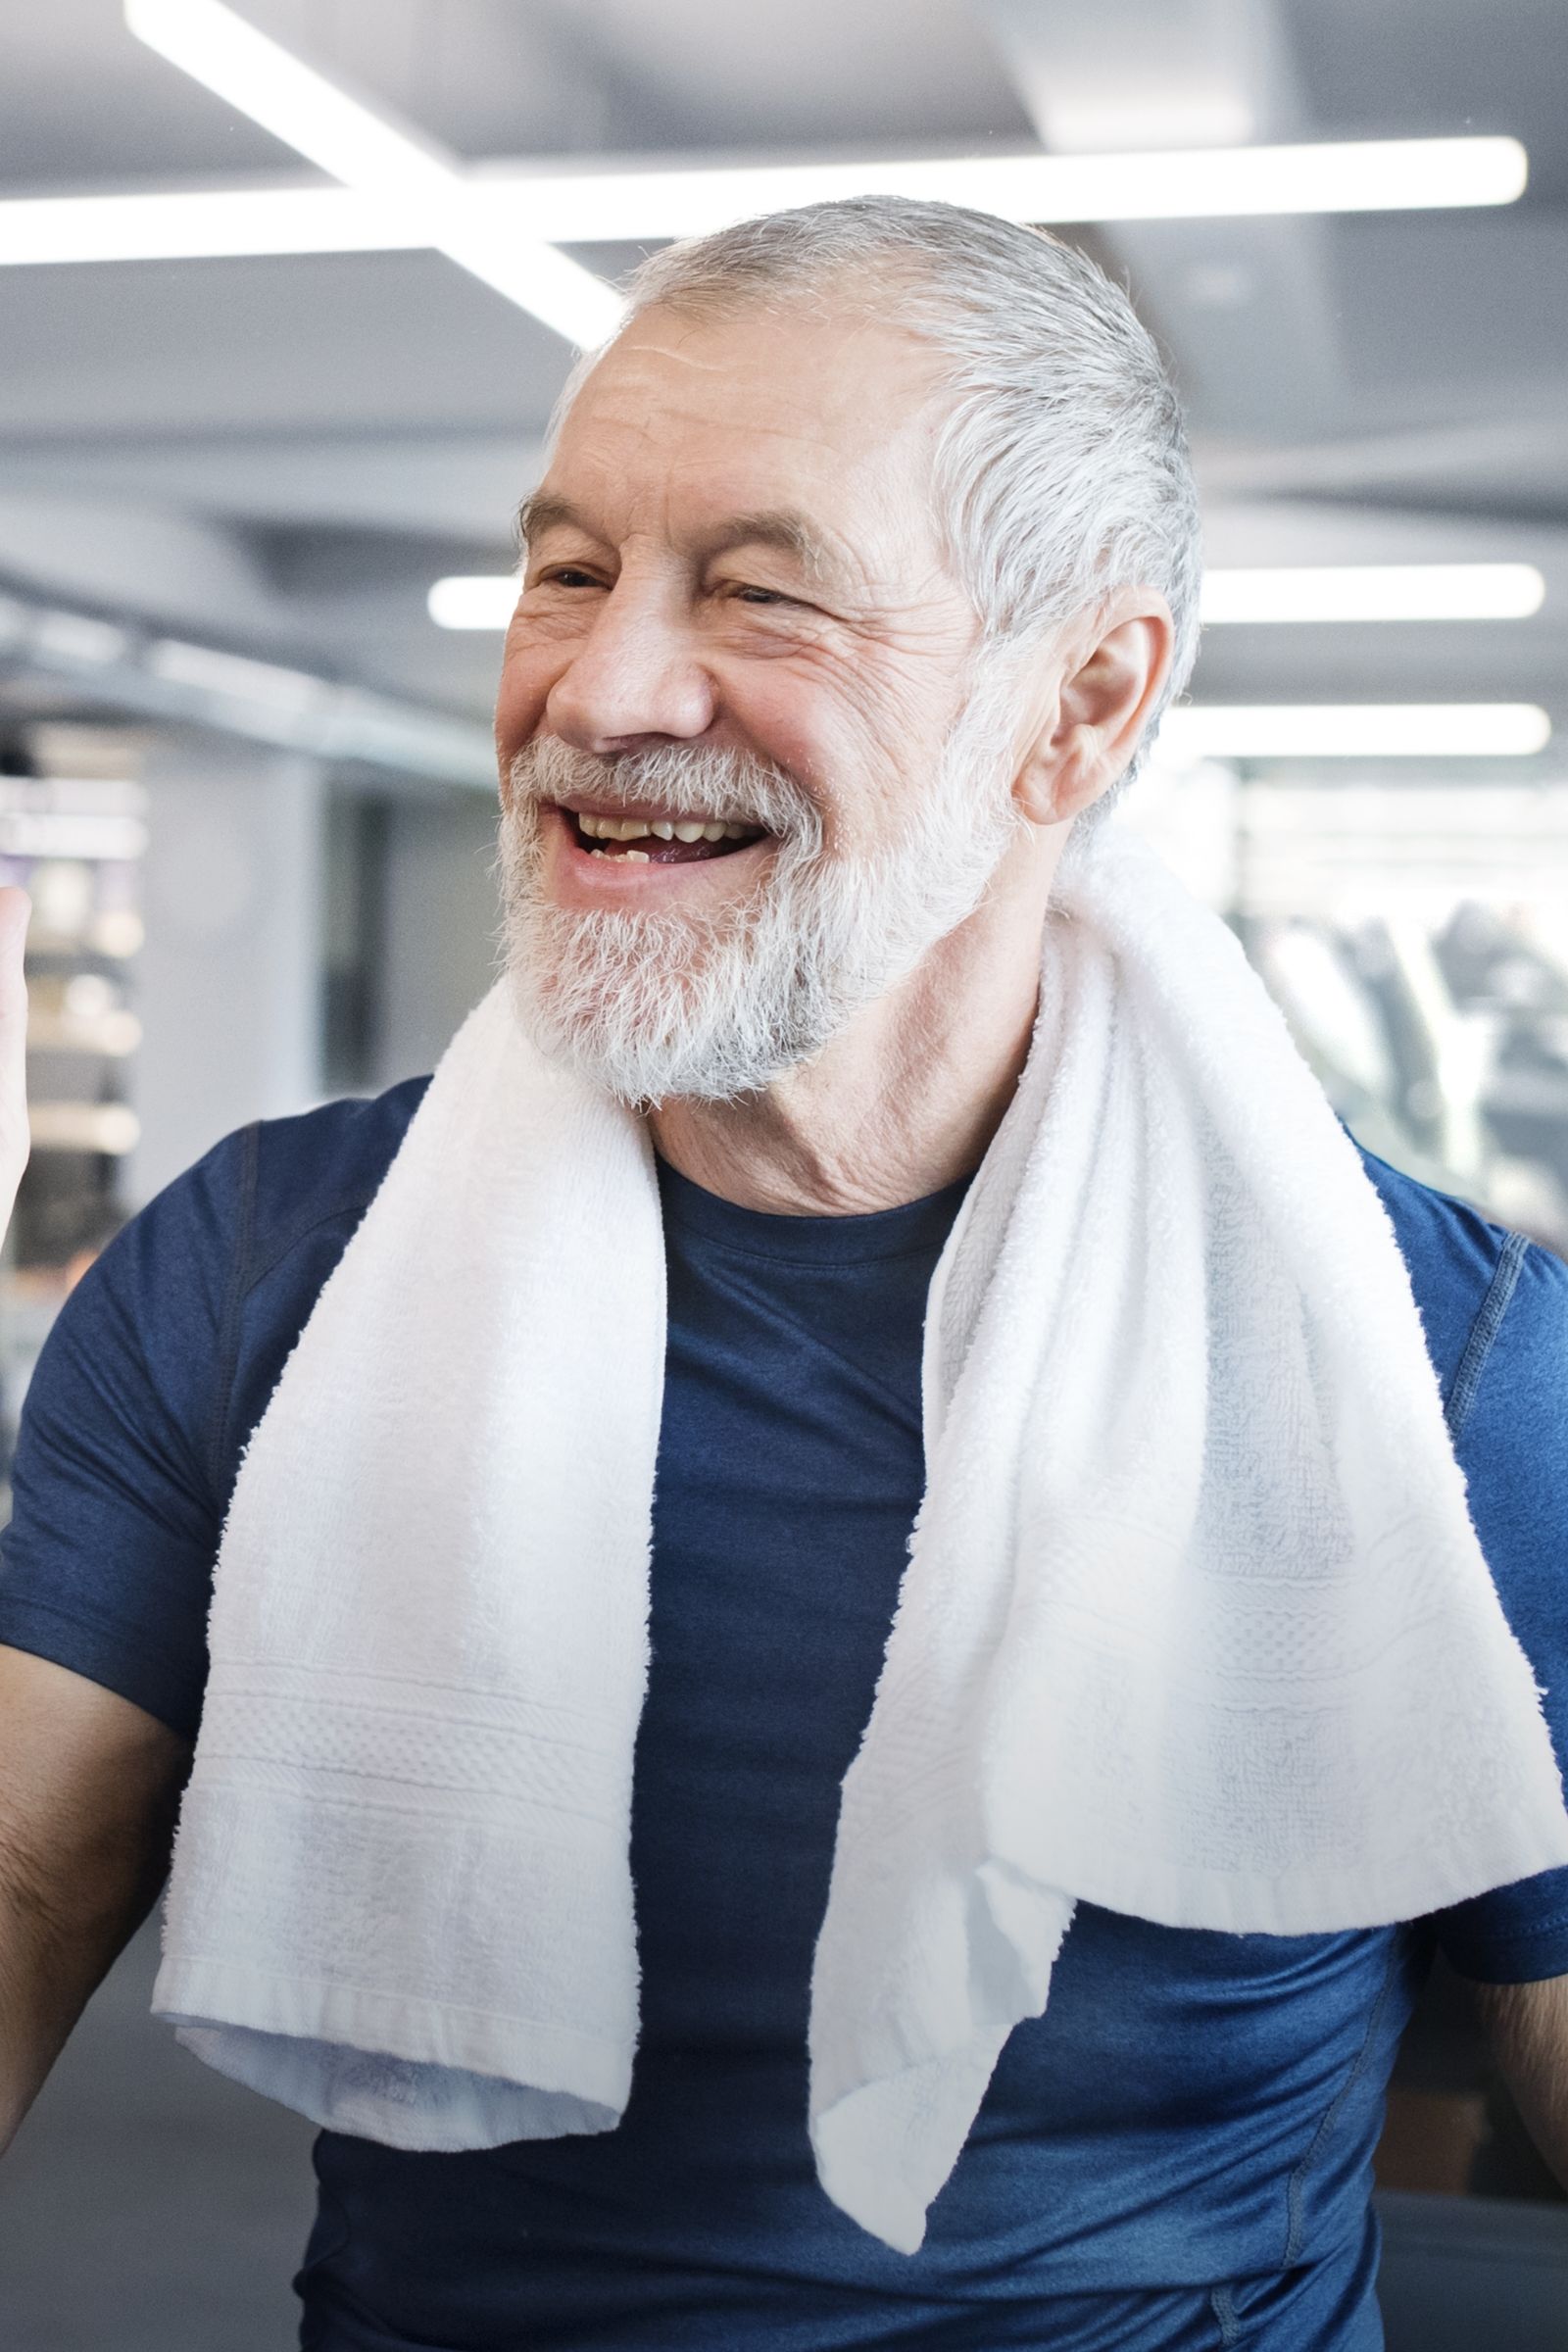 Older adult smiles with a towel around his neck after a workout